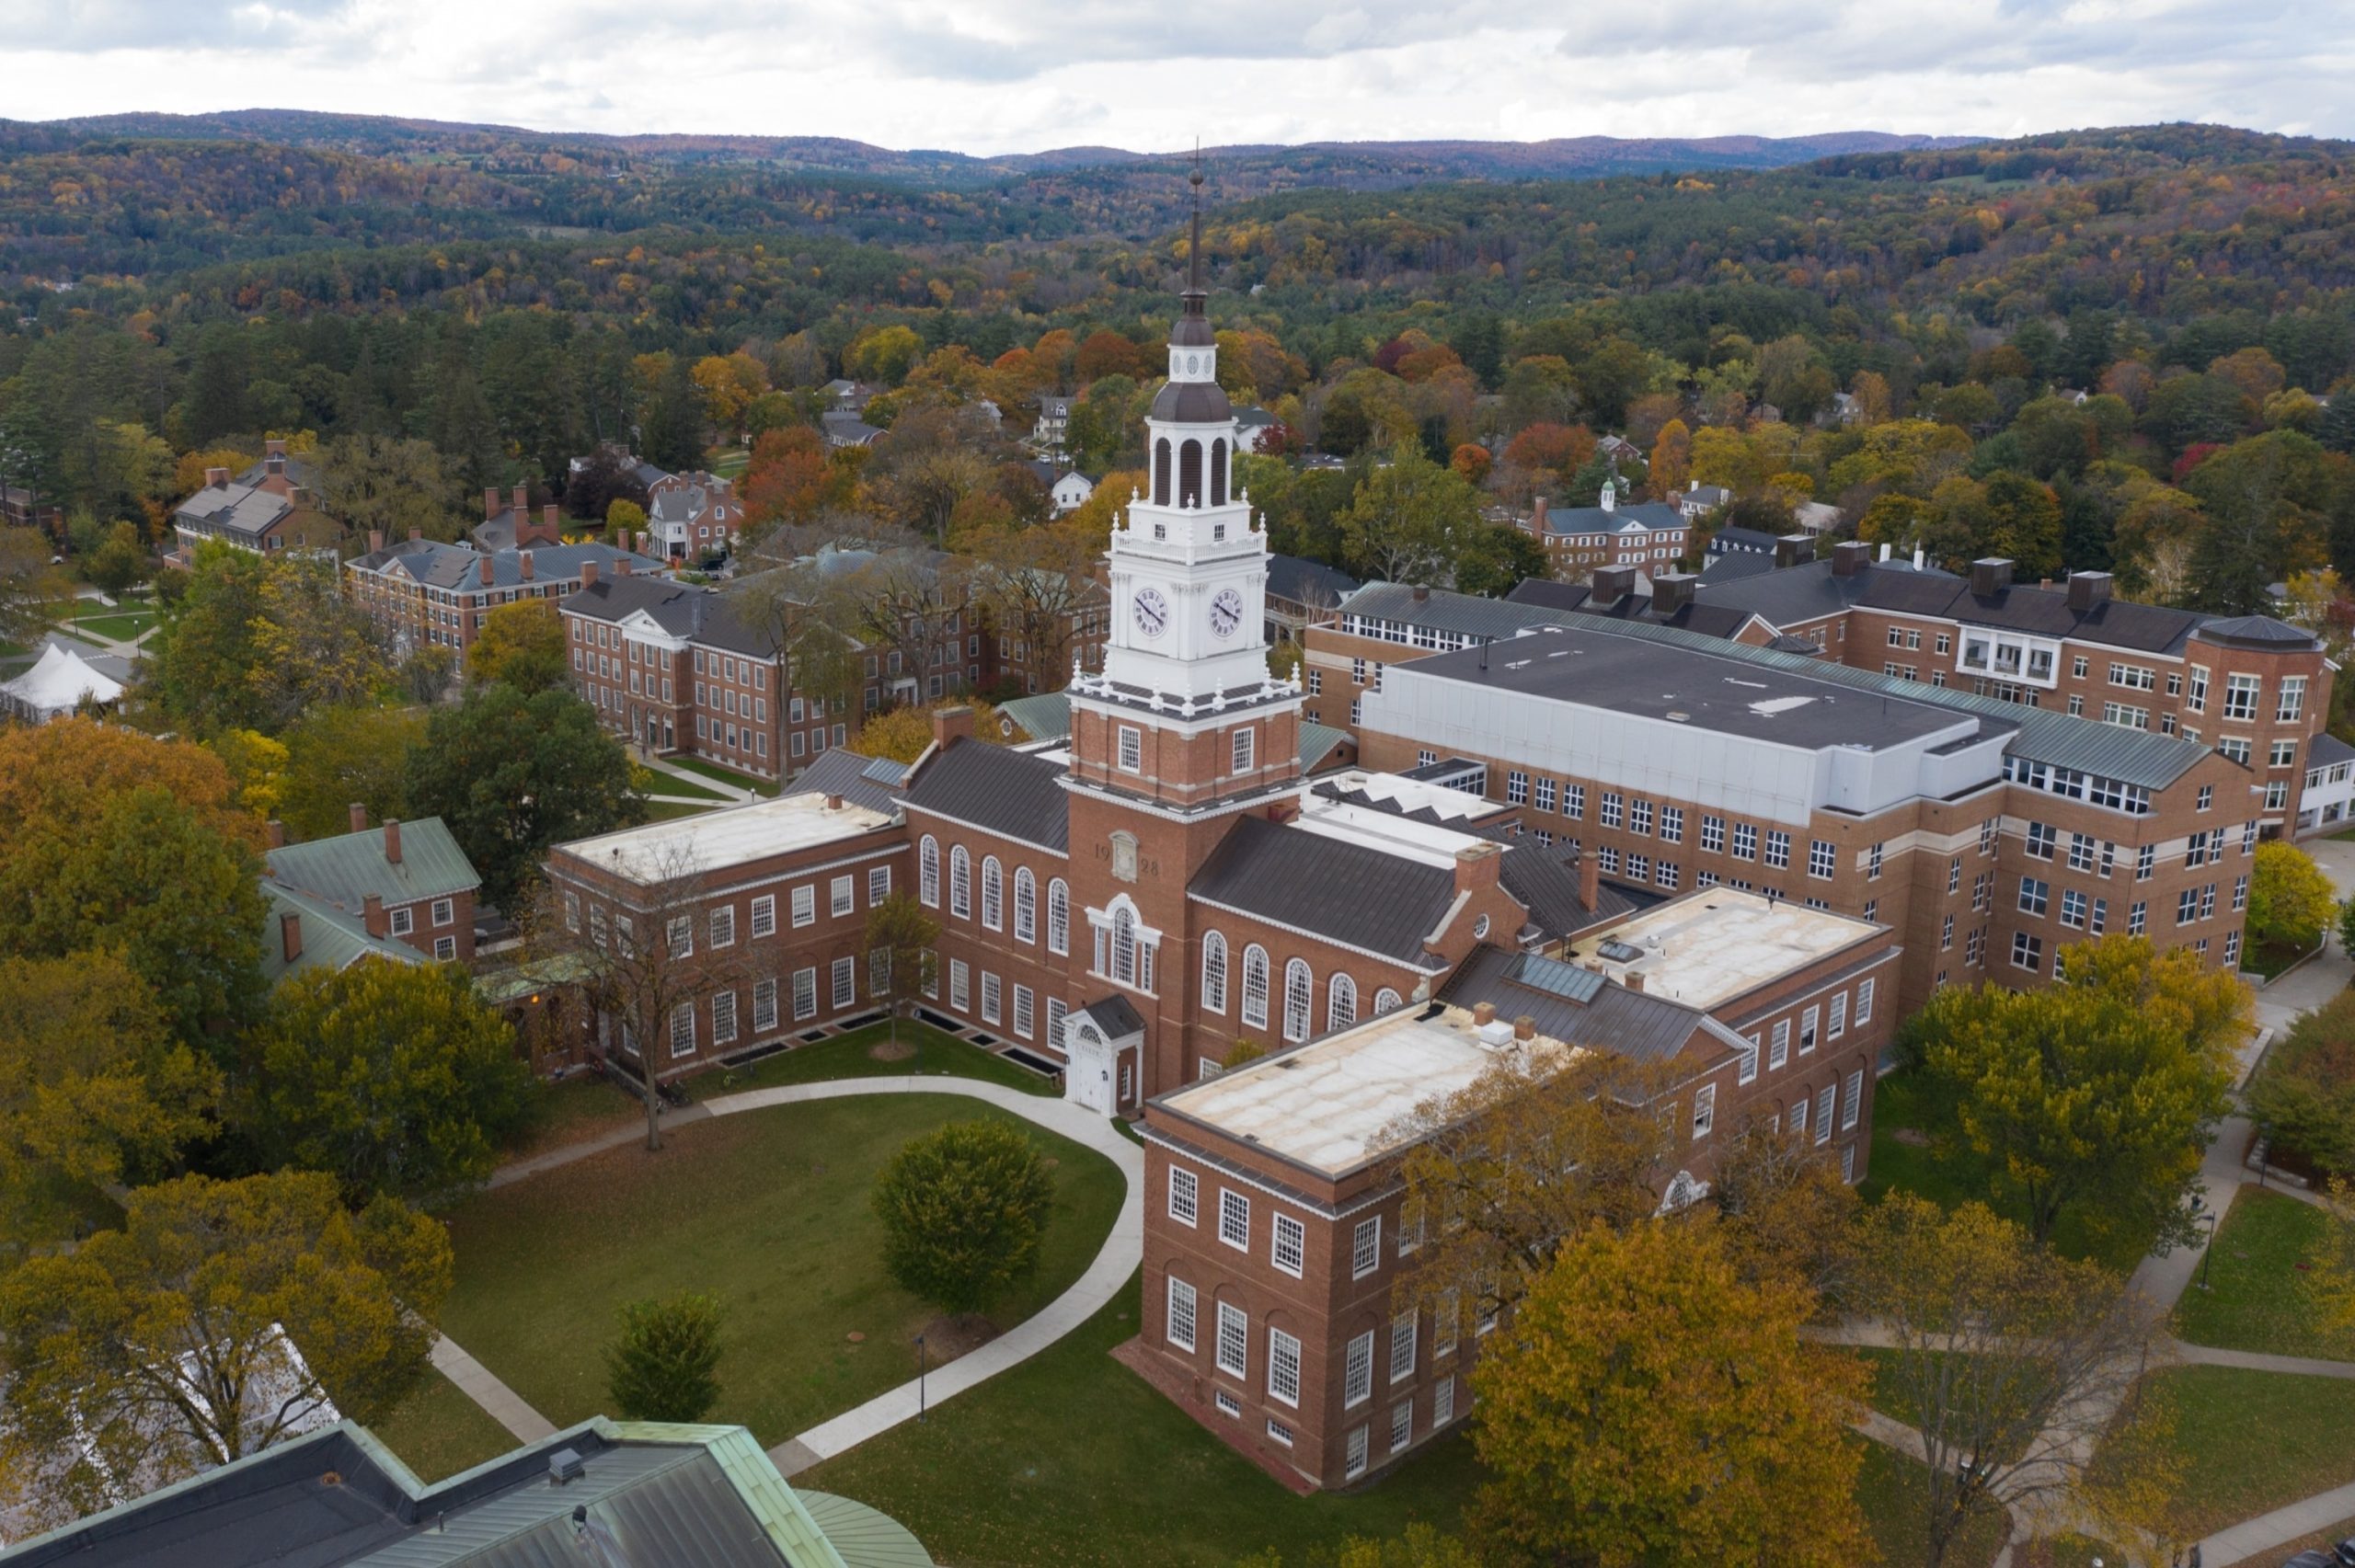 The Role of Standardized Tests Highlighted as Dartmouth Reinstates SAT/ACT Scores